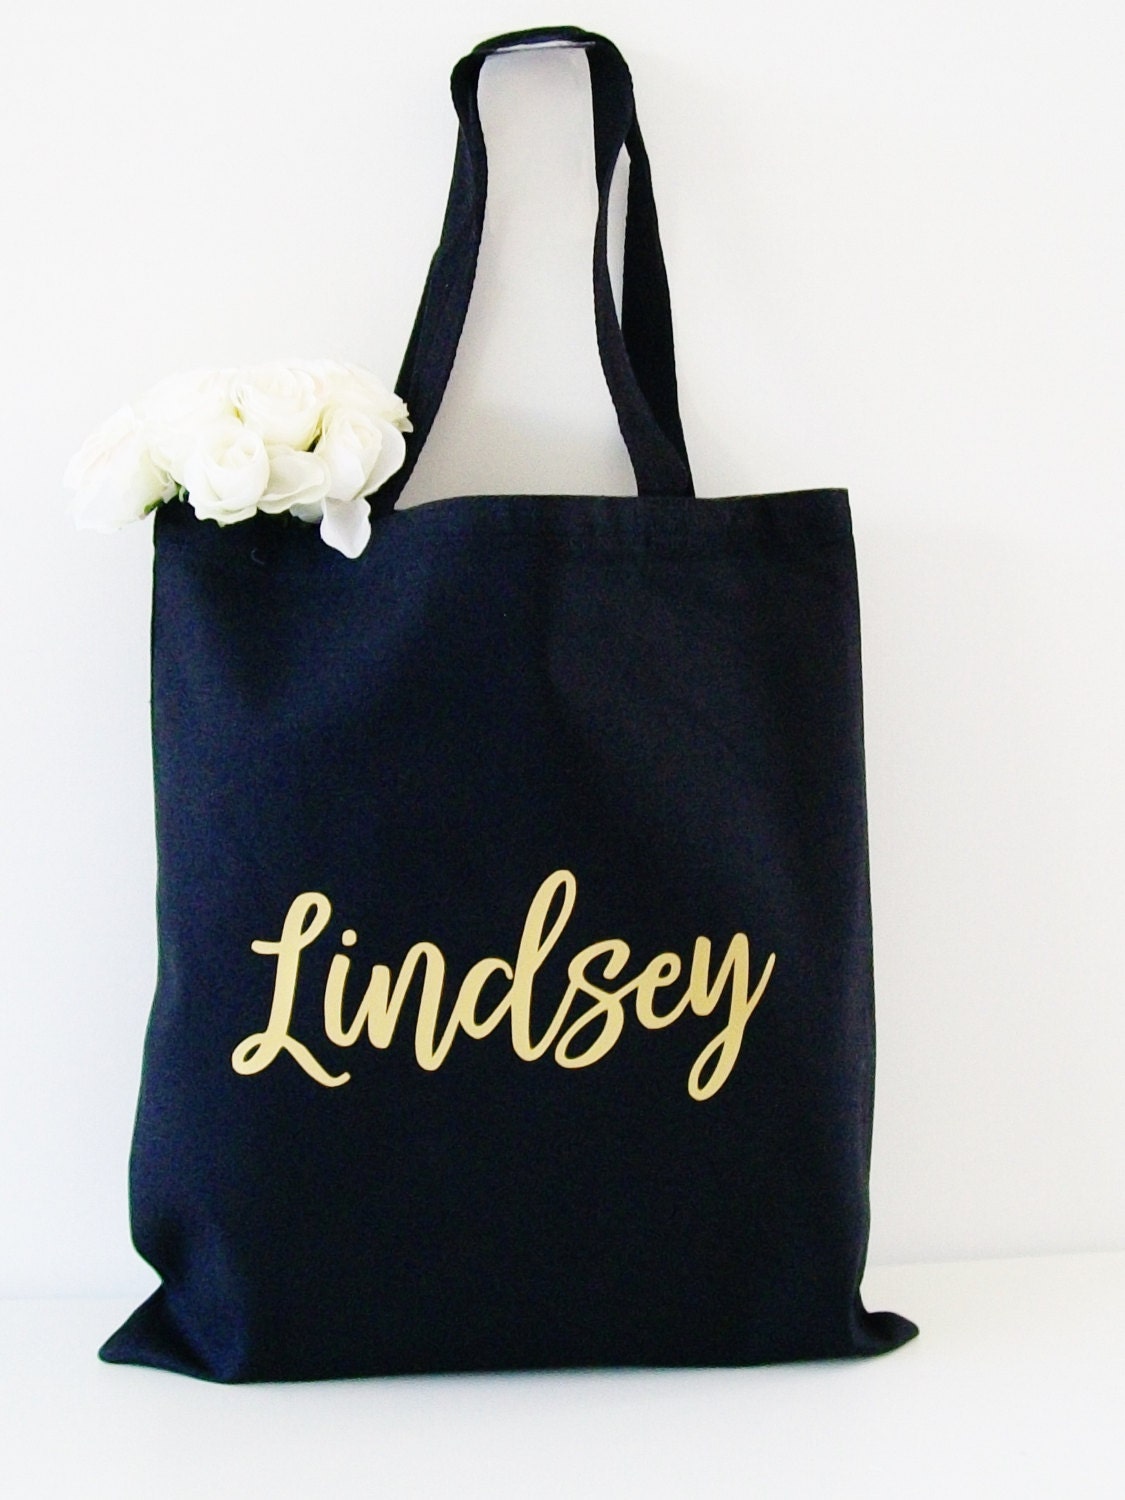 Black Tote Bag Custom tote bag Personalized Carry all tote